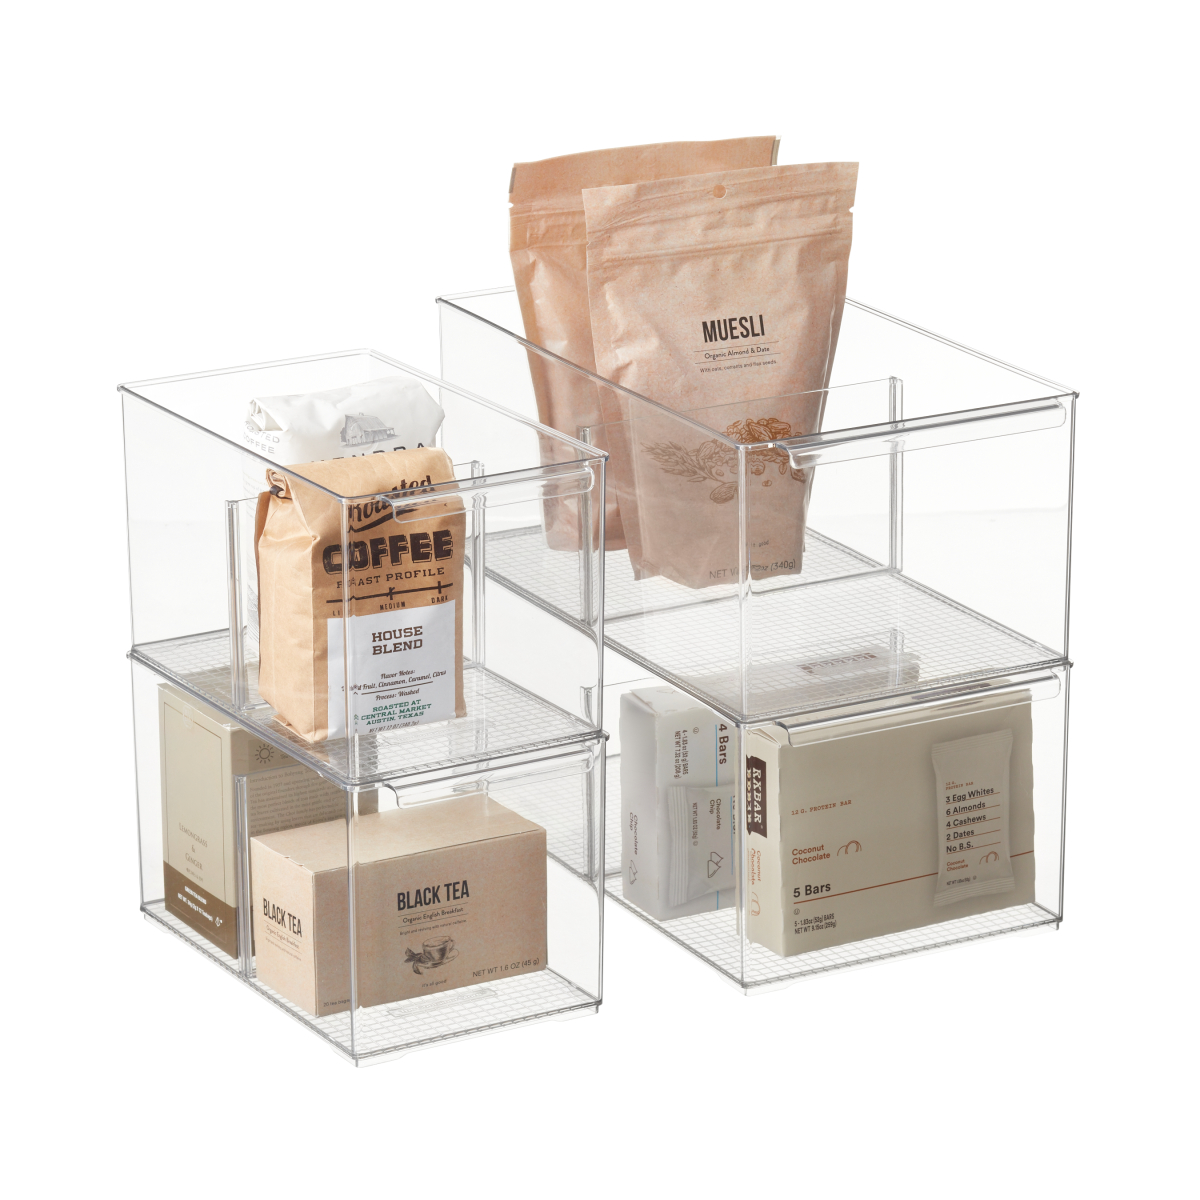 https://www.containerstore.com/catalogimages/476188/10090084-everything-organizer-pantry.jpg